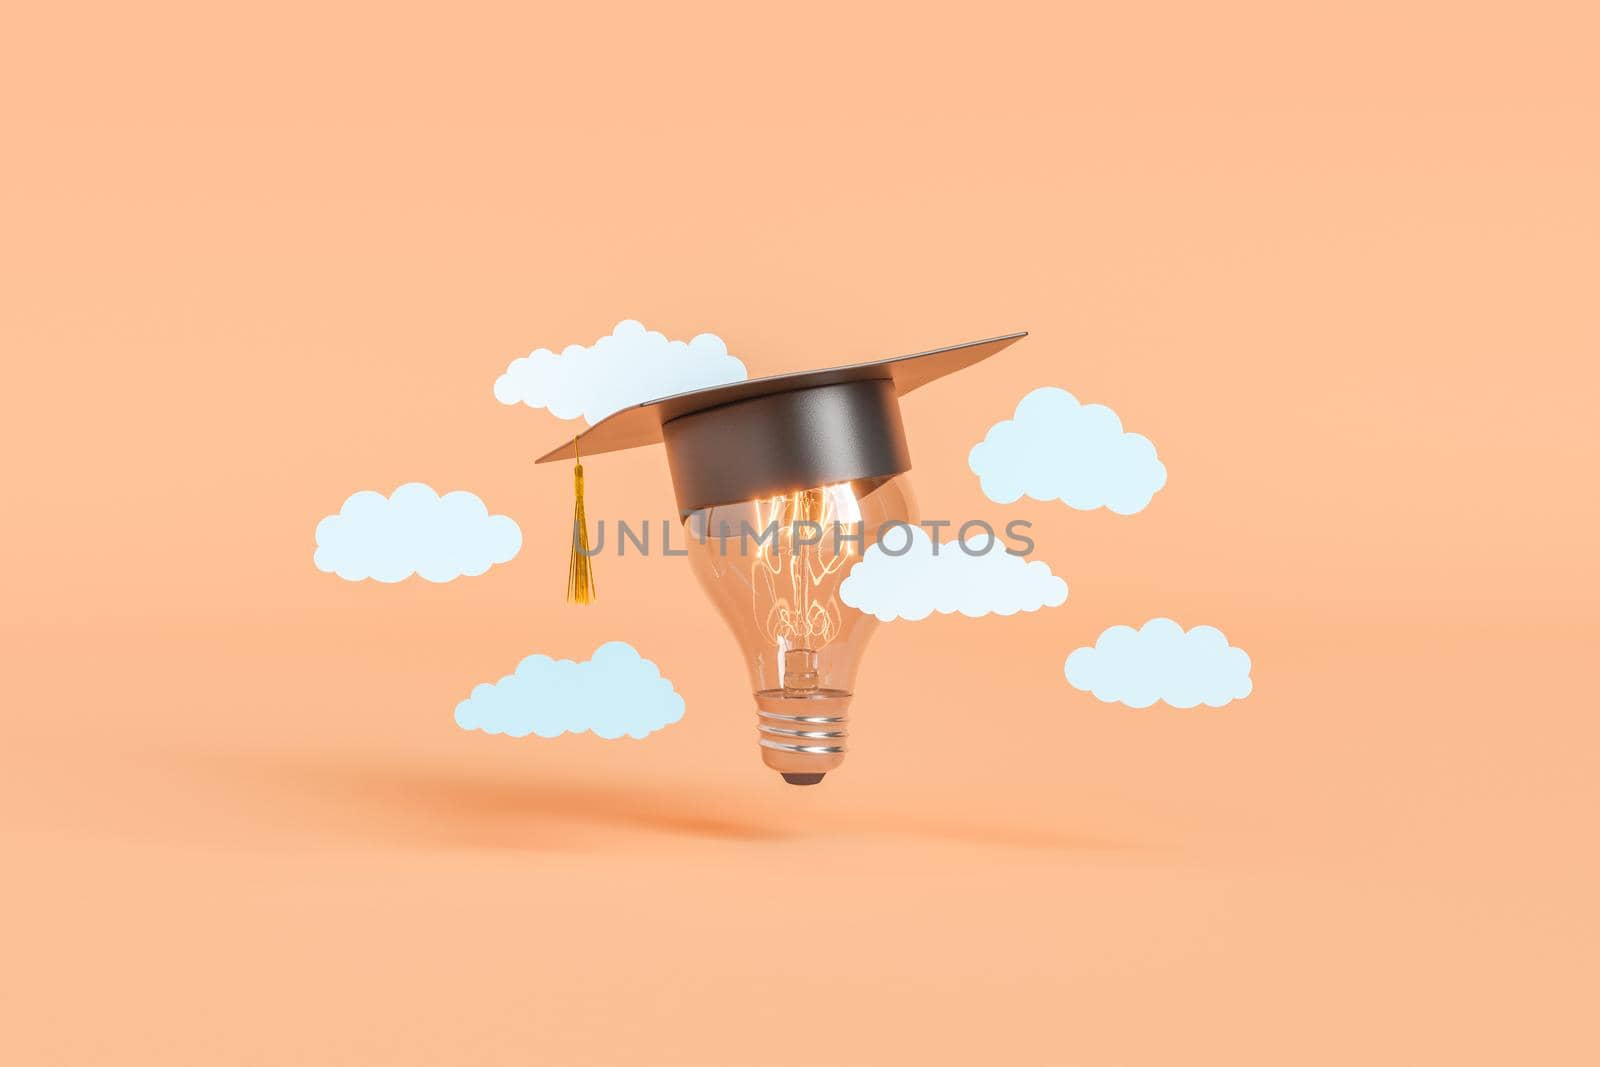 3d Illustration of luminous light bulb in graduation cap among clouds for concept of imagination and studying in university on beige background